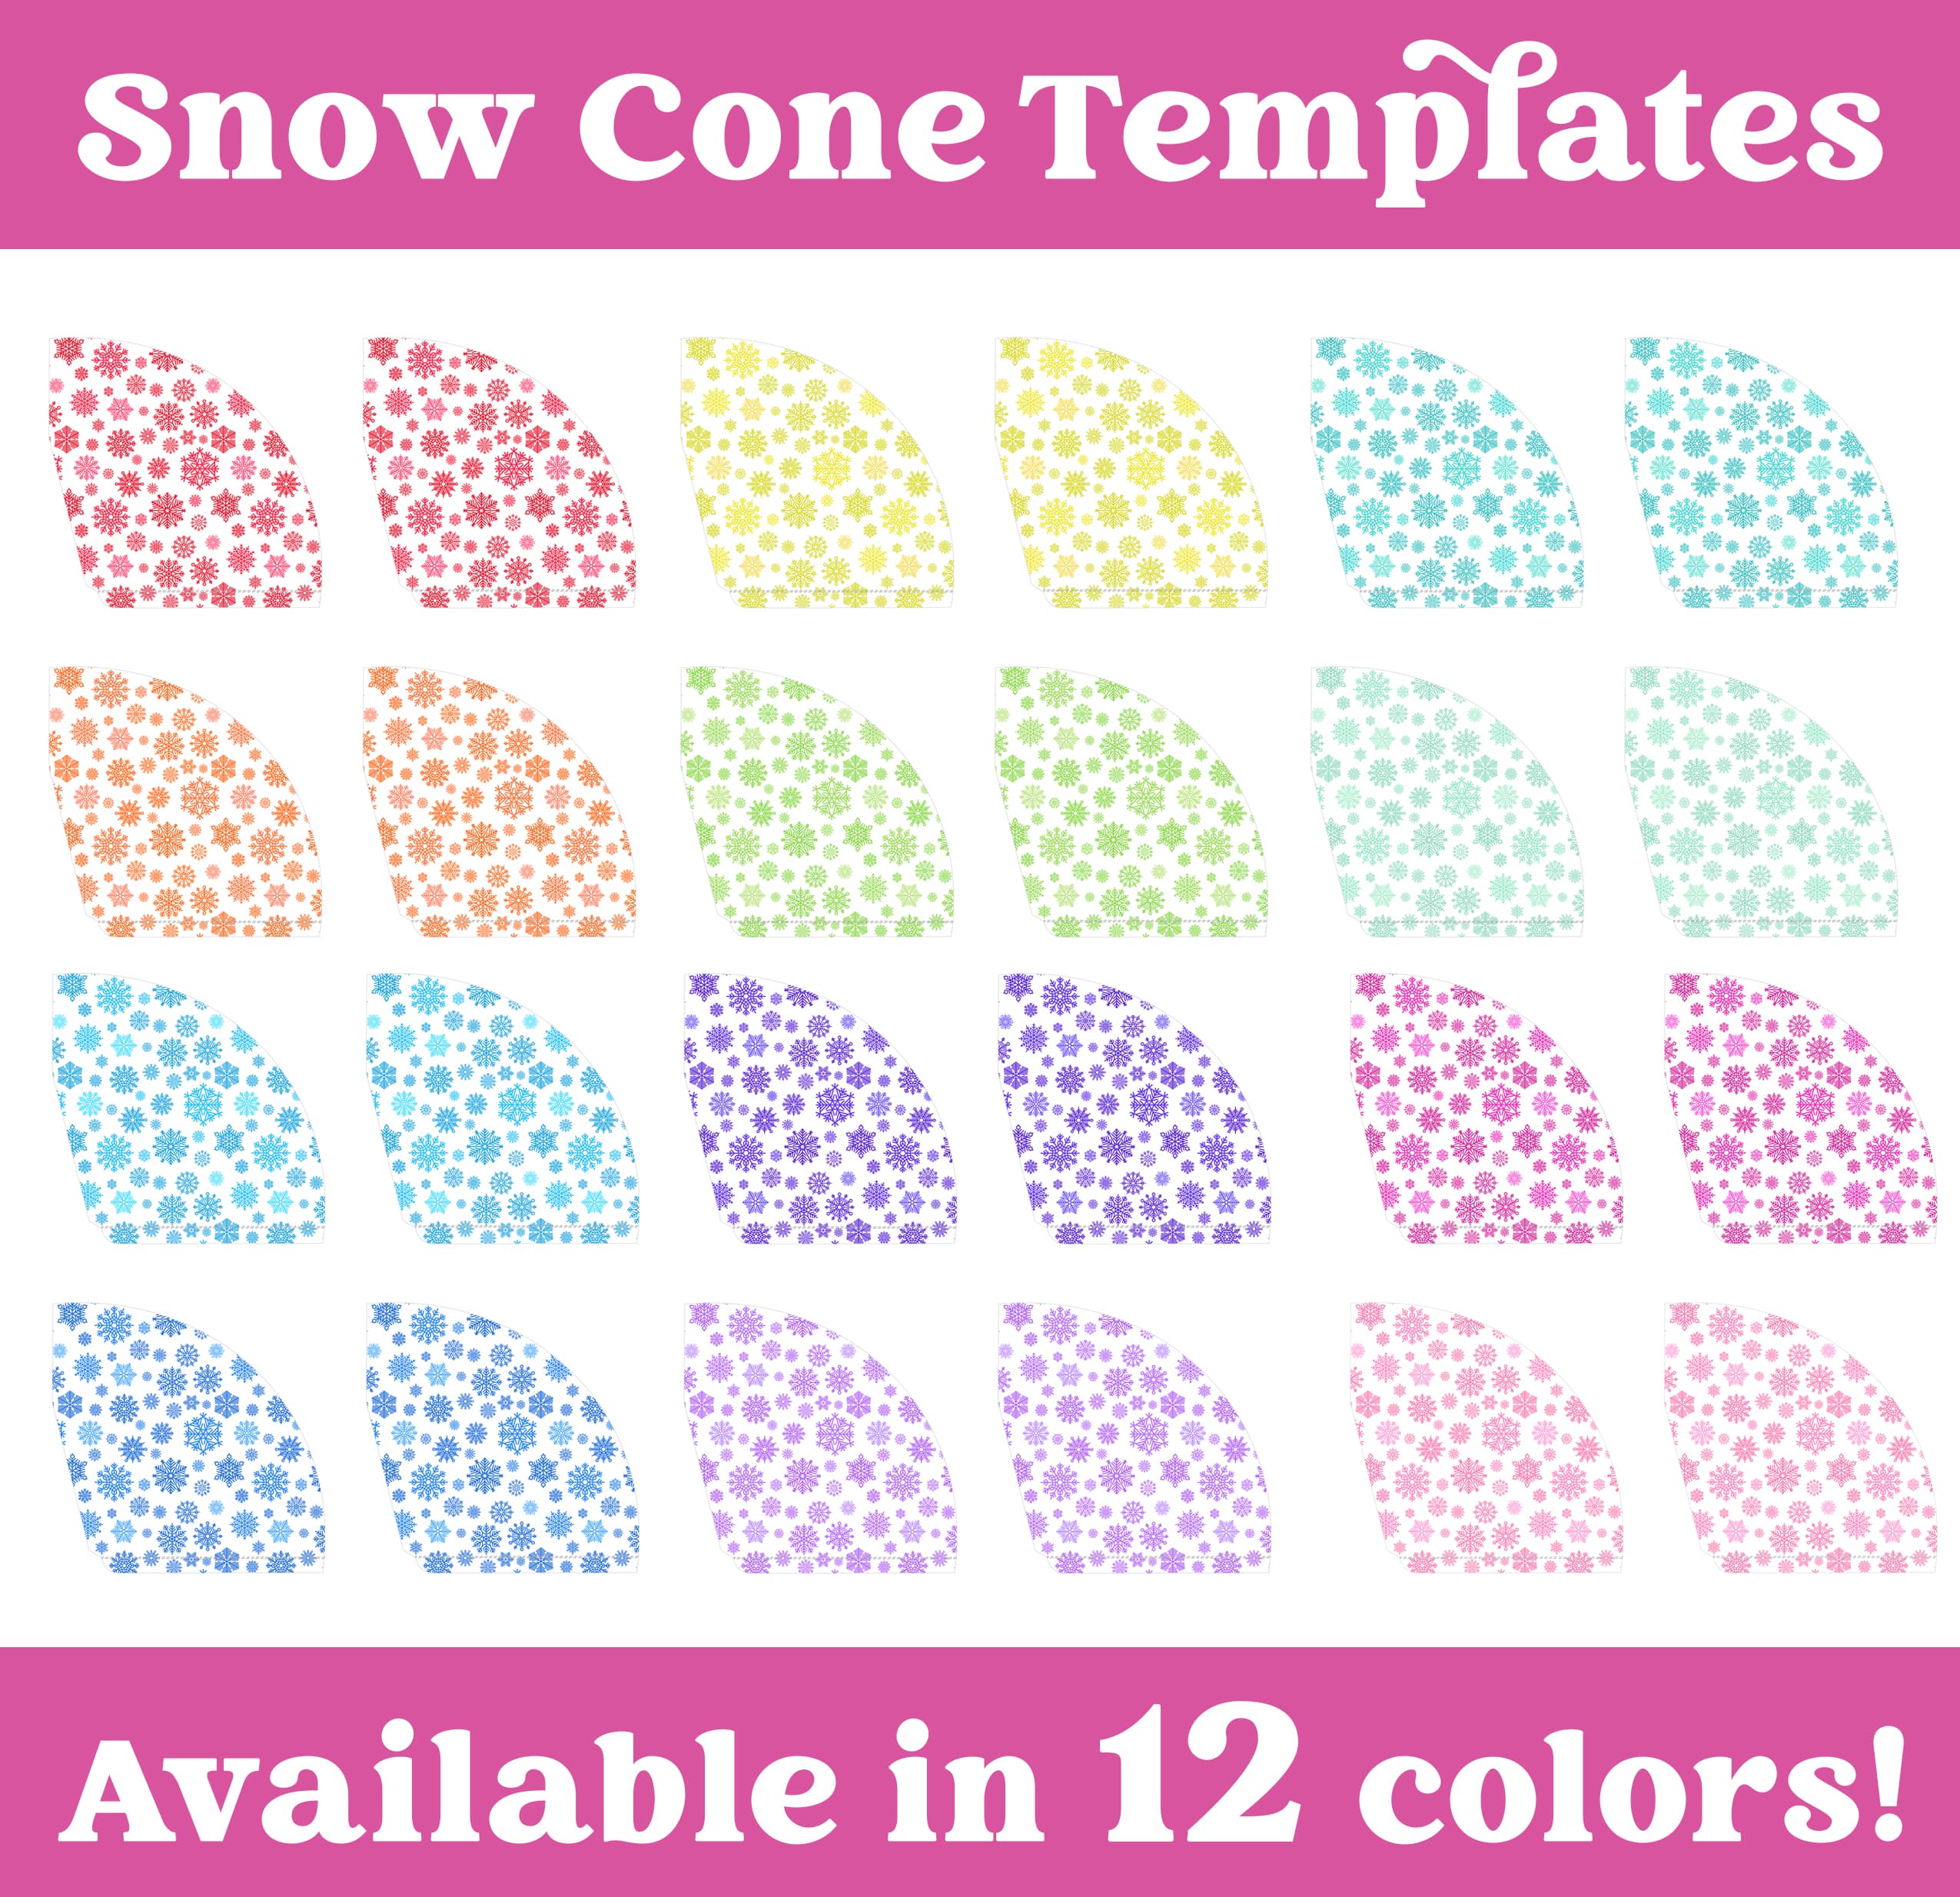 snow cone templates available in 12 colors